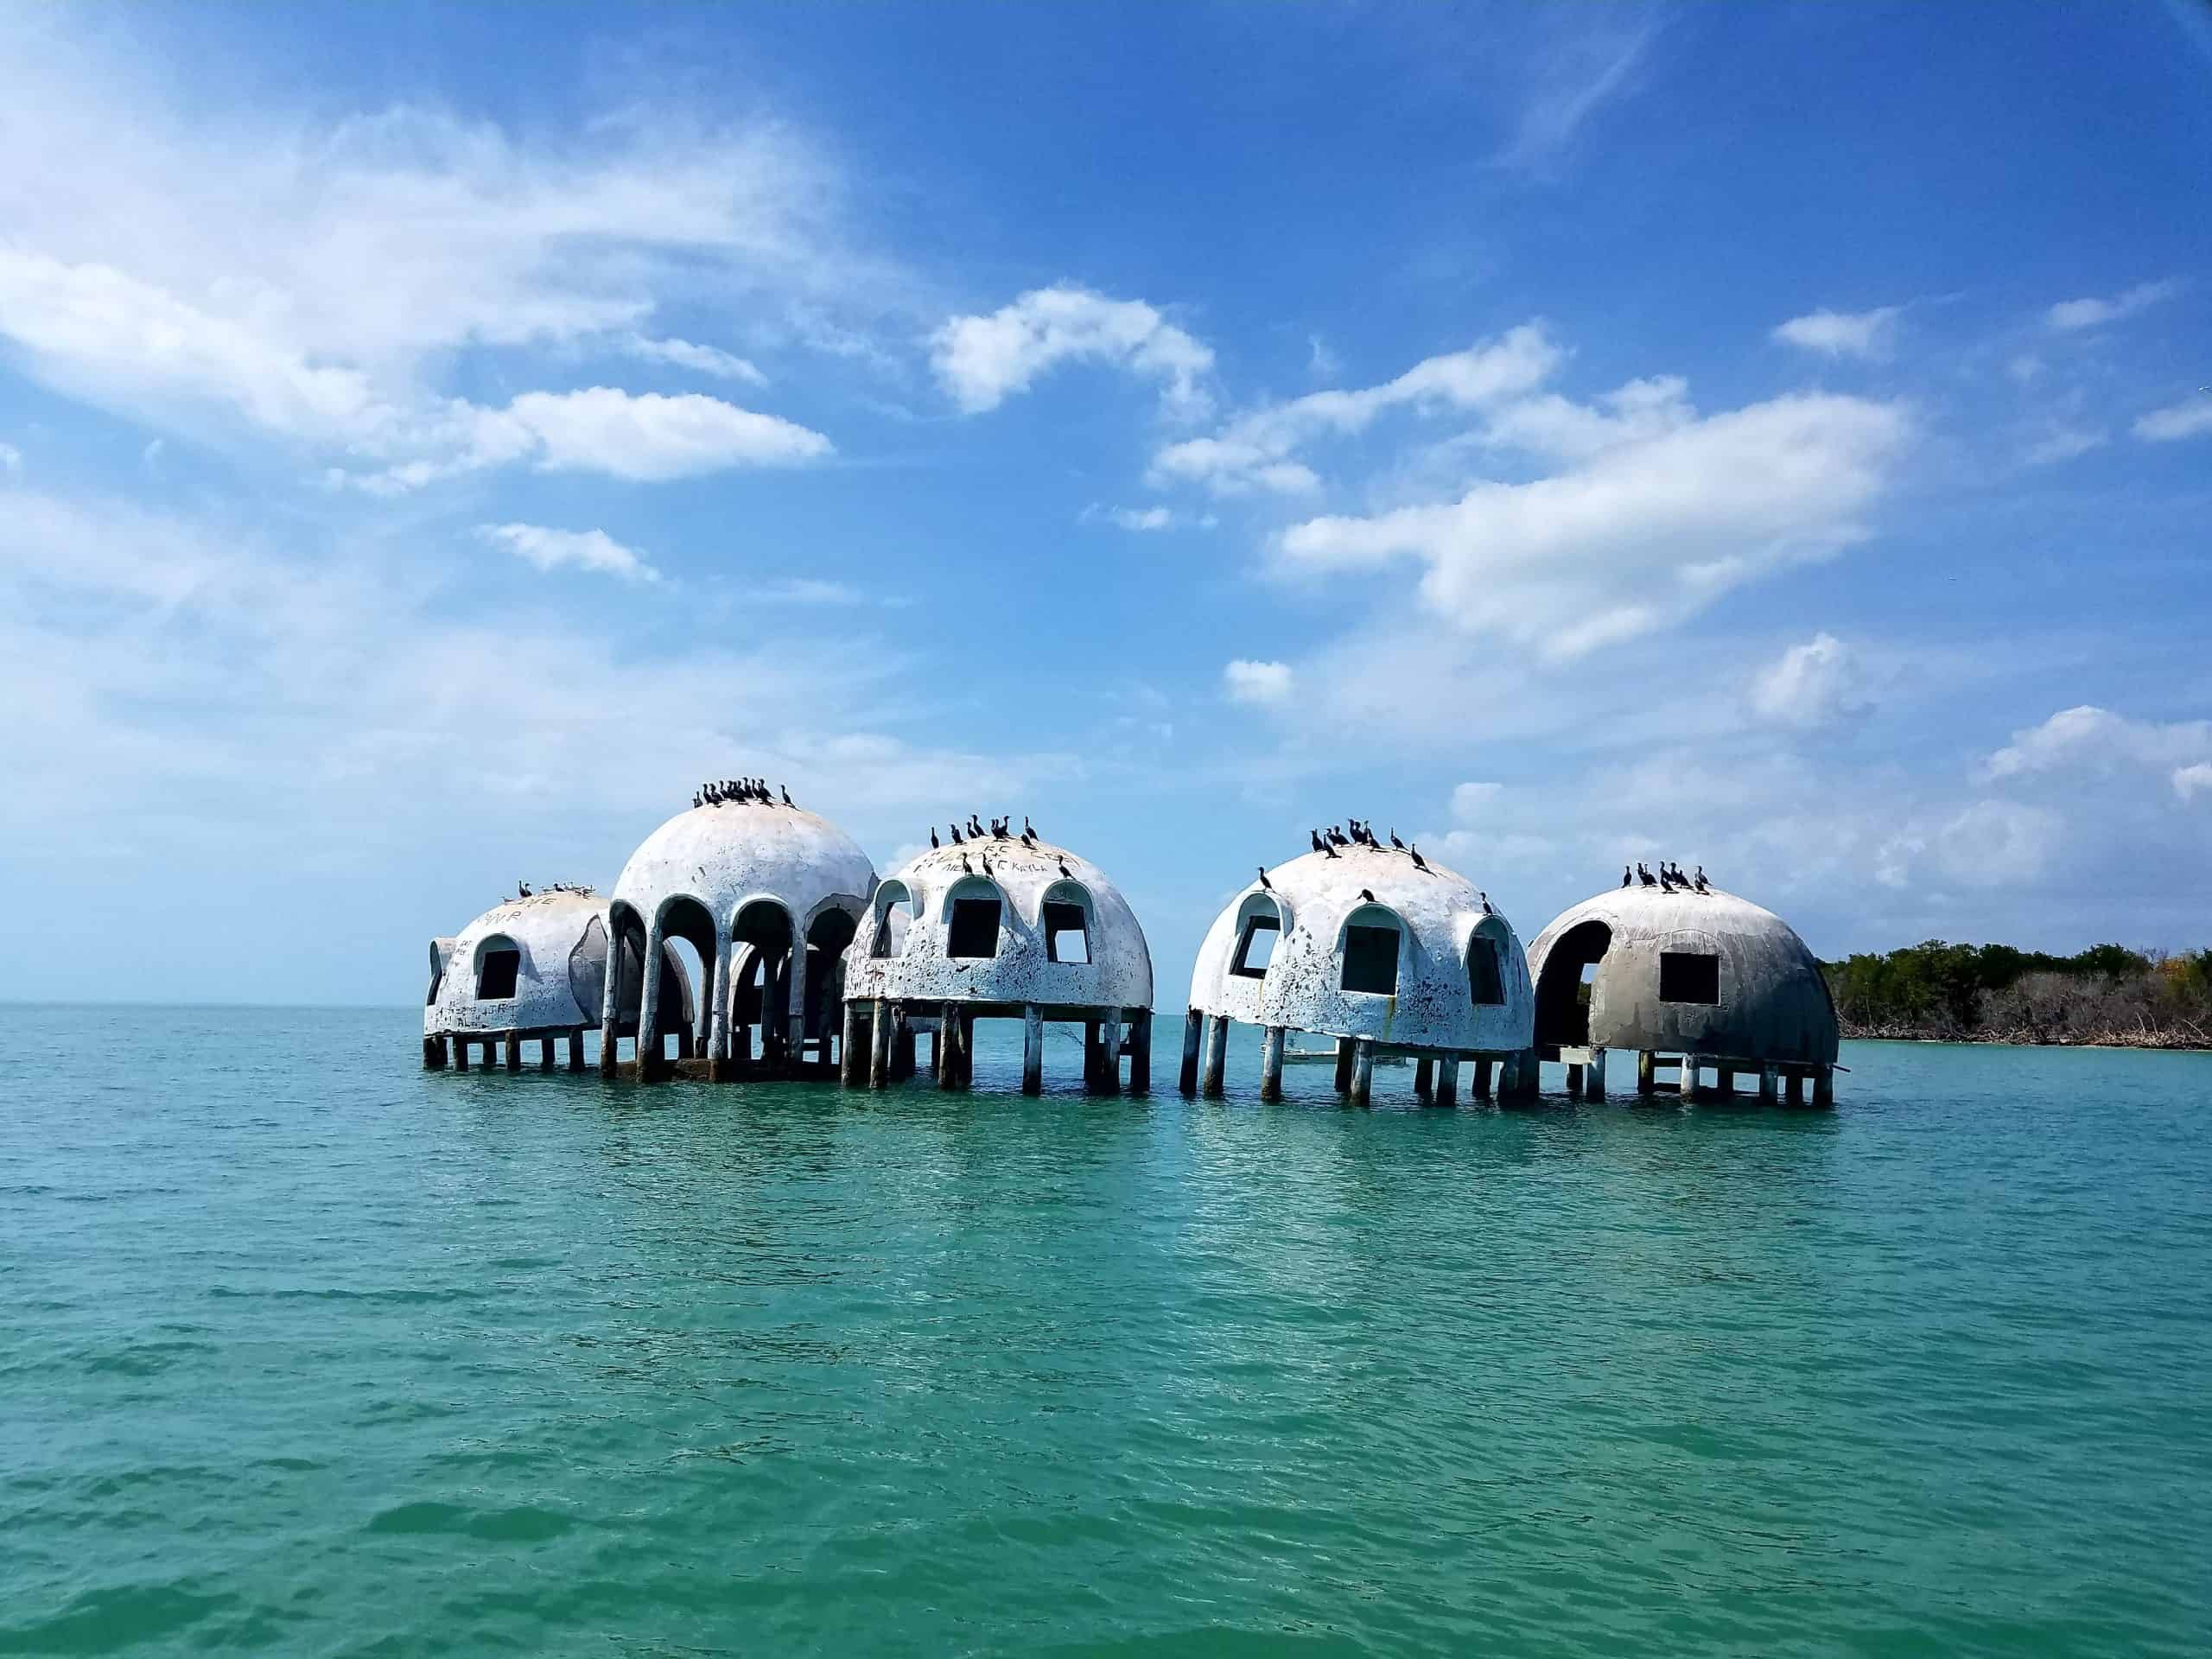 https://floridatrippers.com/wp-content/uploads/2020/09/things-to-do-in-naples-marco-island-scaled.jpg